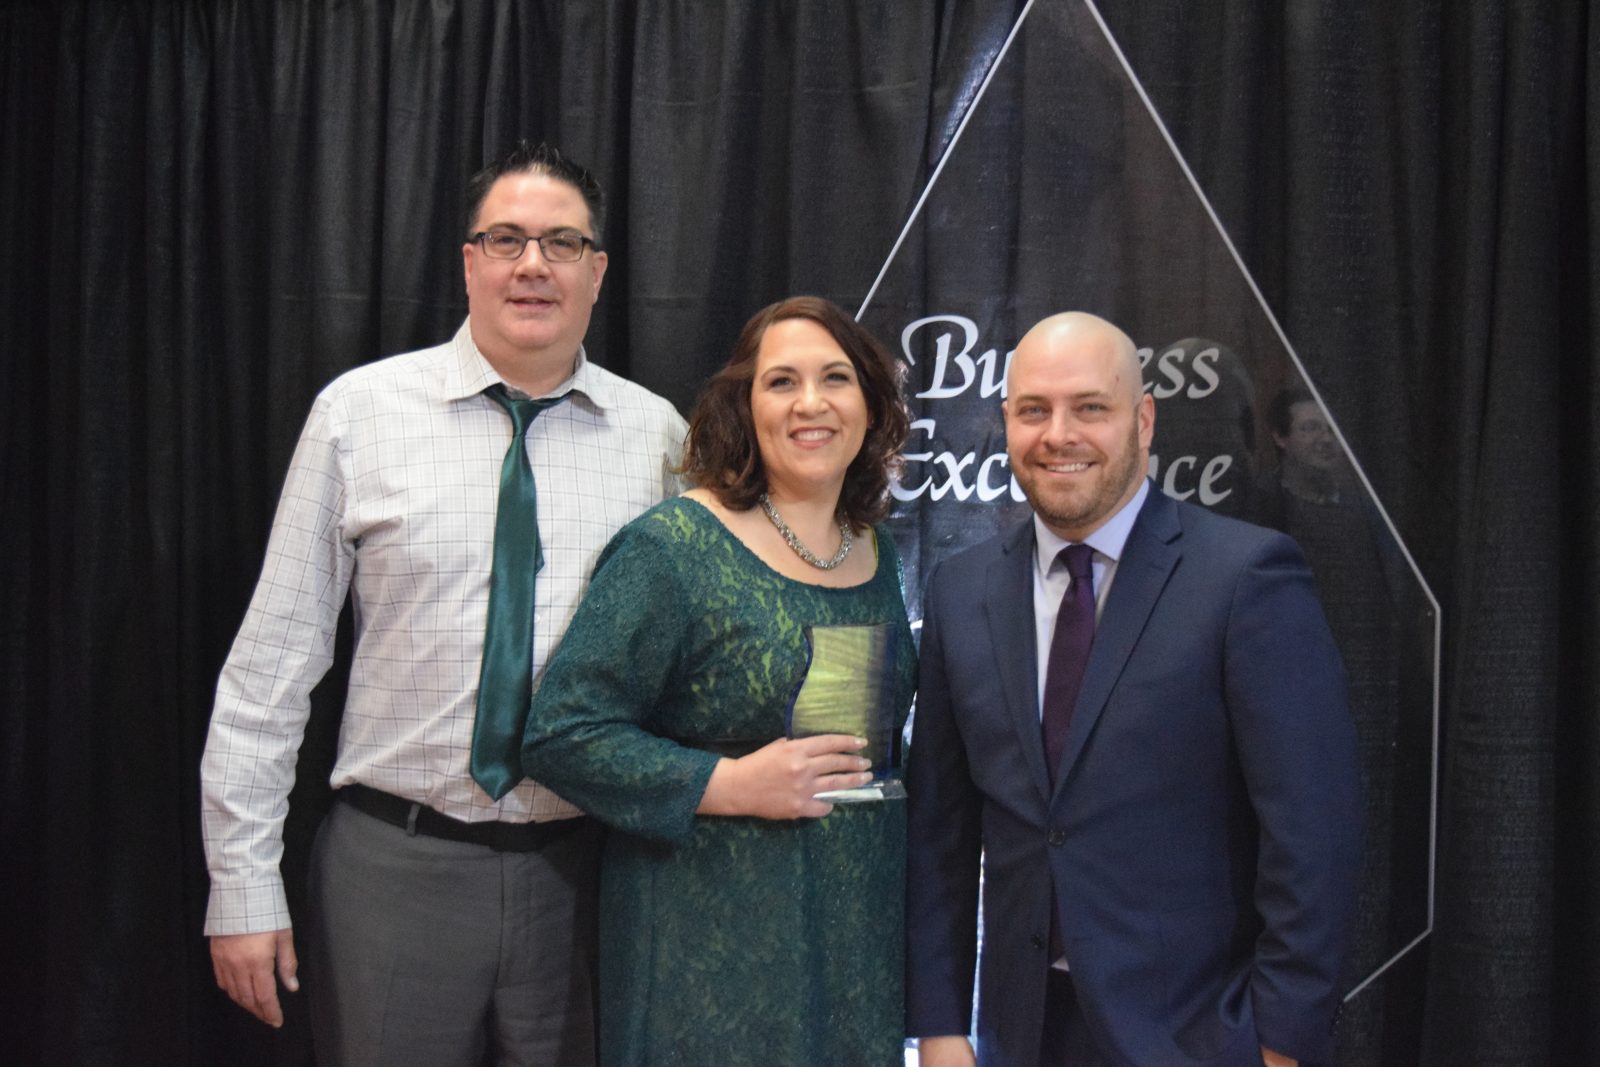 Nominations open for Business Excellence Awards, Citizen of the Year